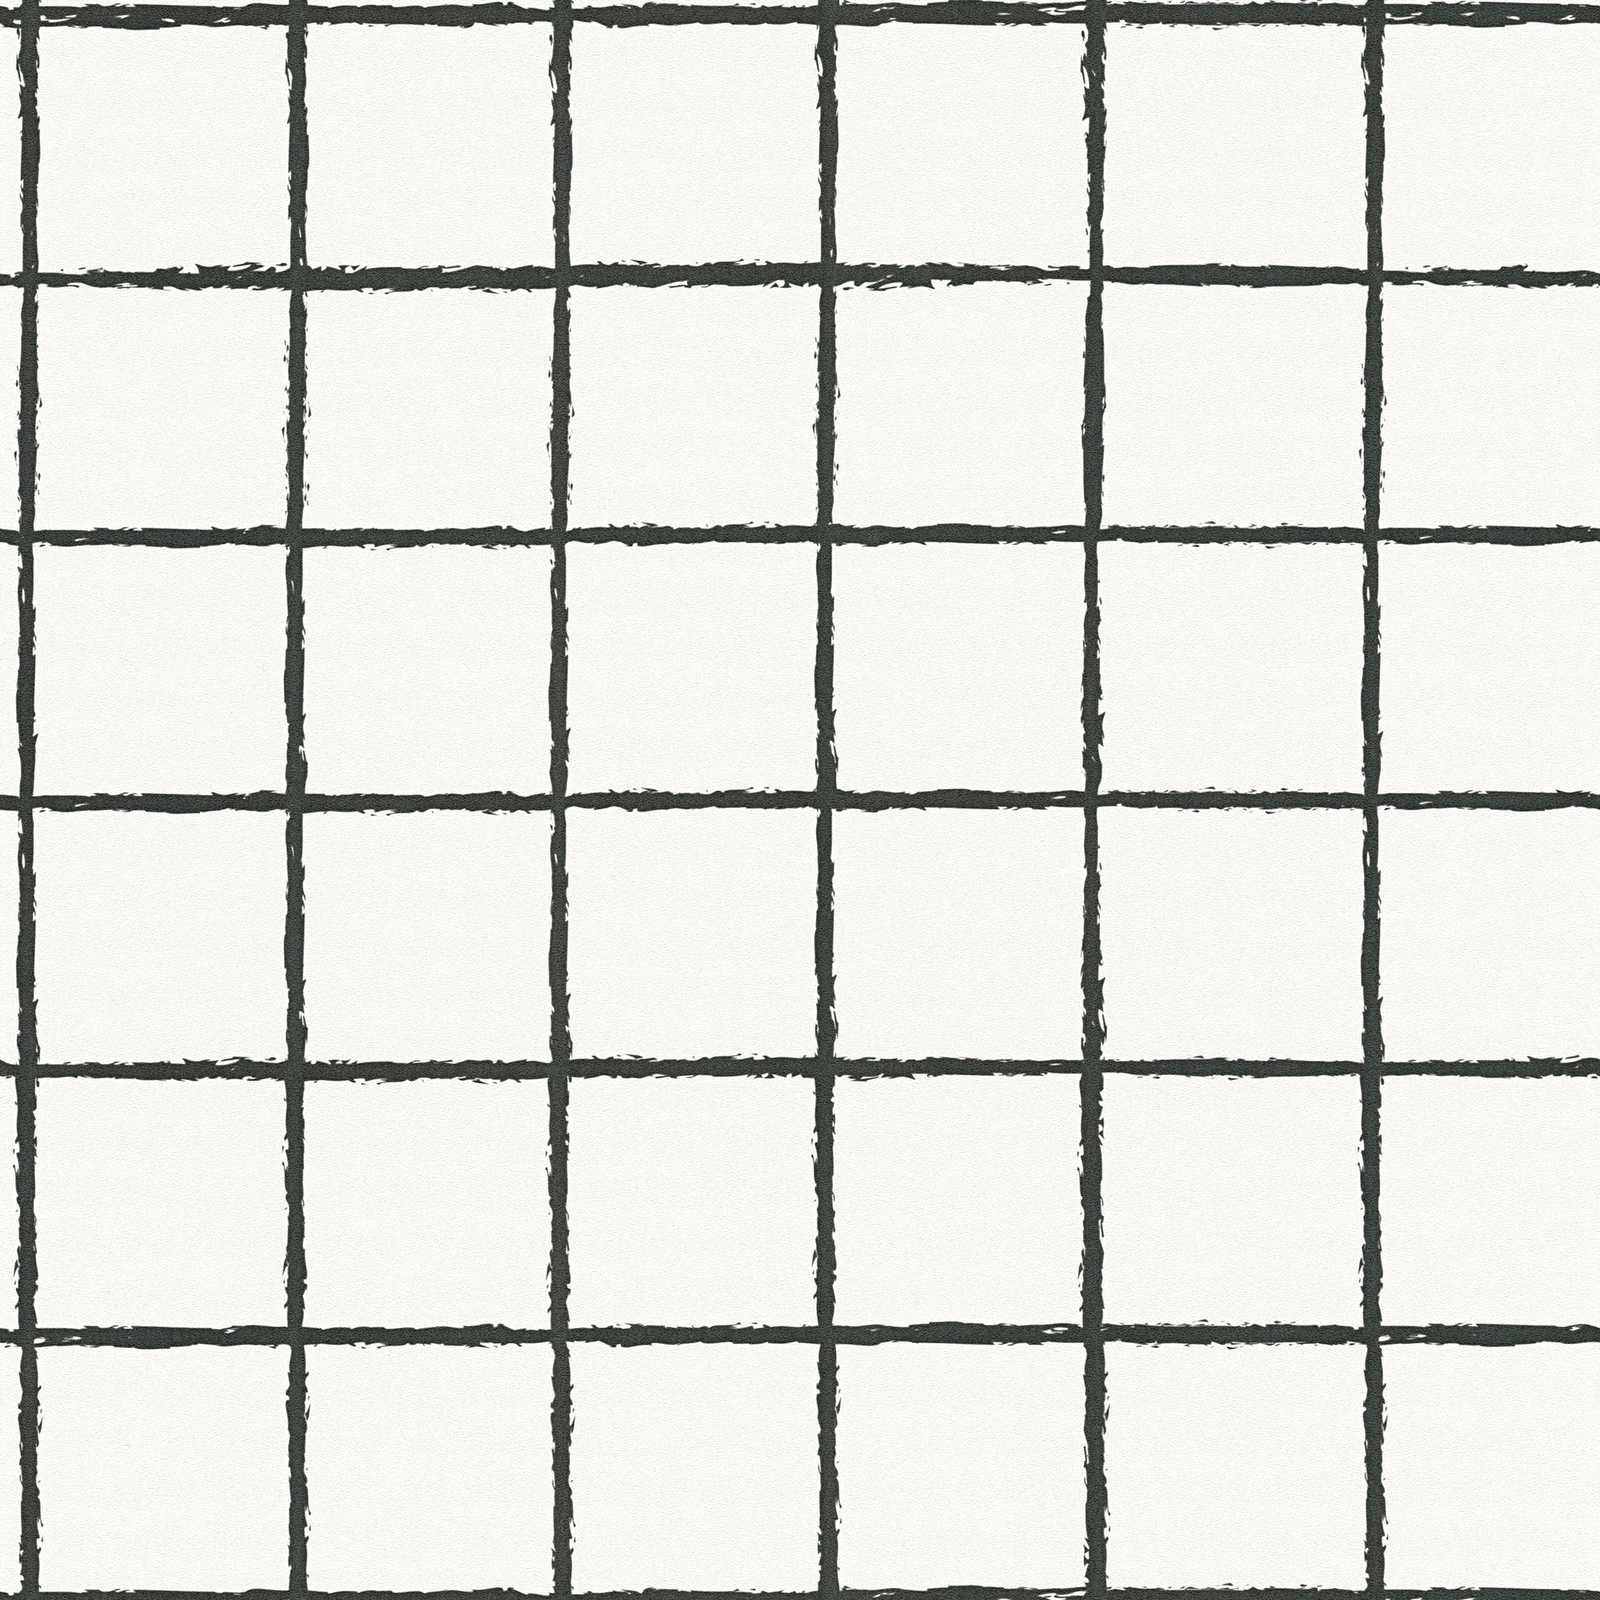             Non-woven wallpaper with drawn check pattern - black and white
        